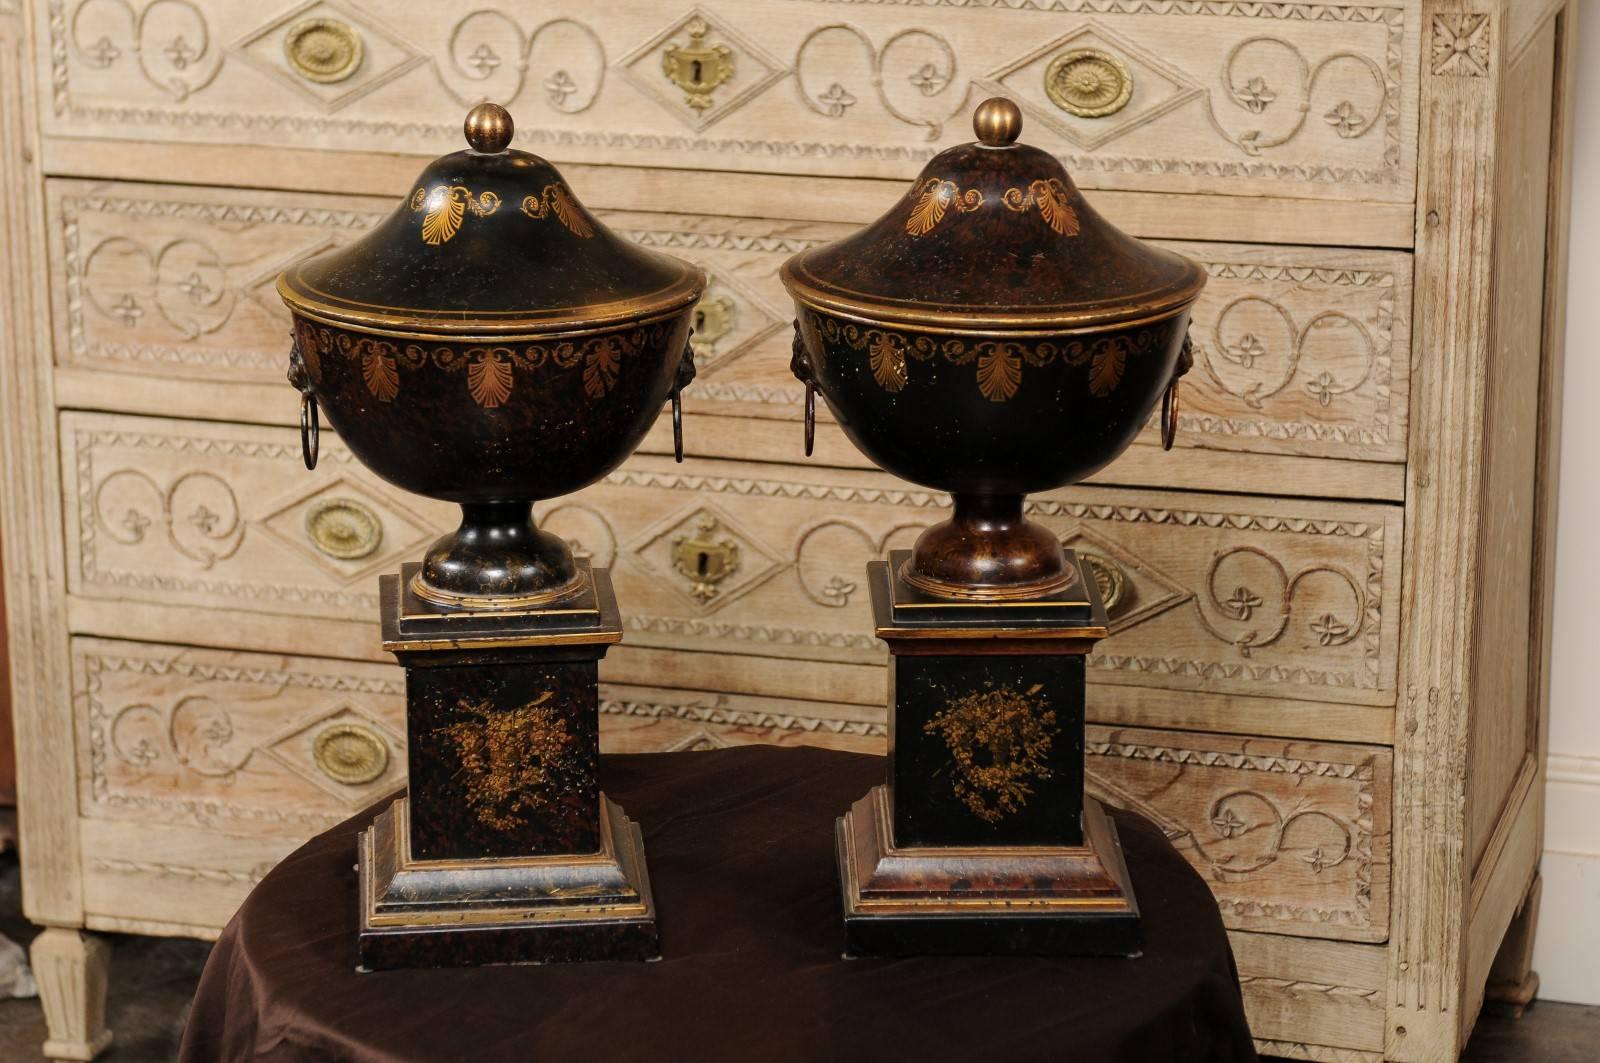 20th Century Pair of French 1920s Tole Black Tole Urns on Pedestals with Gilded Accents